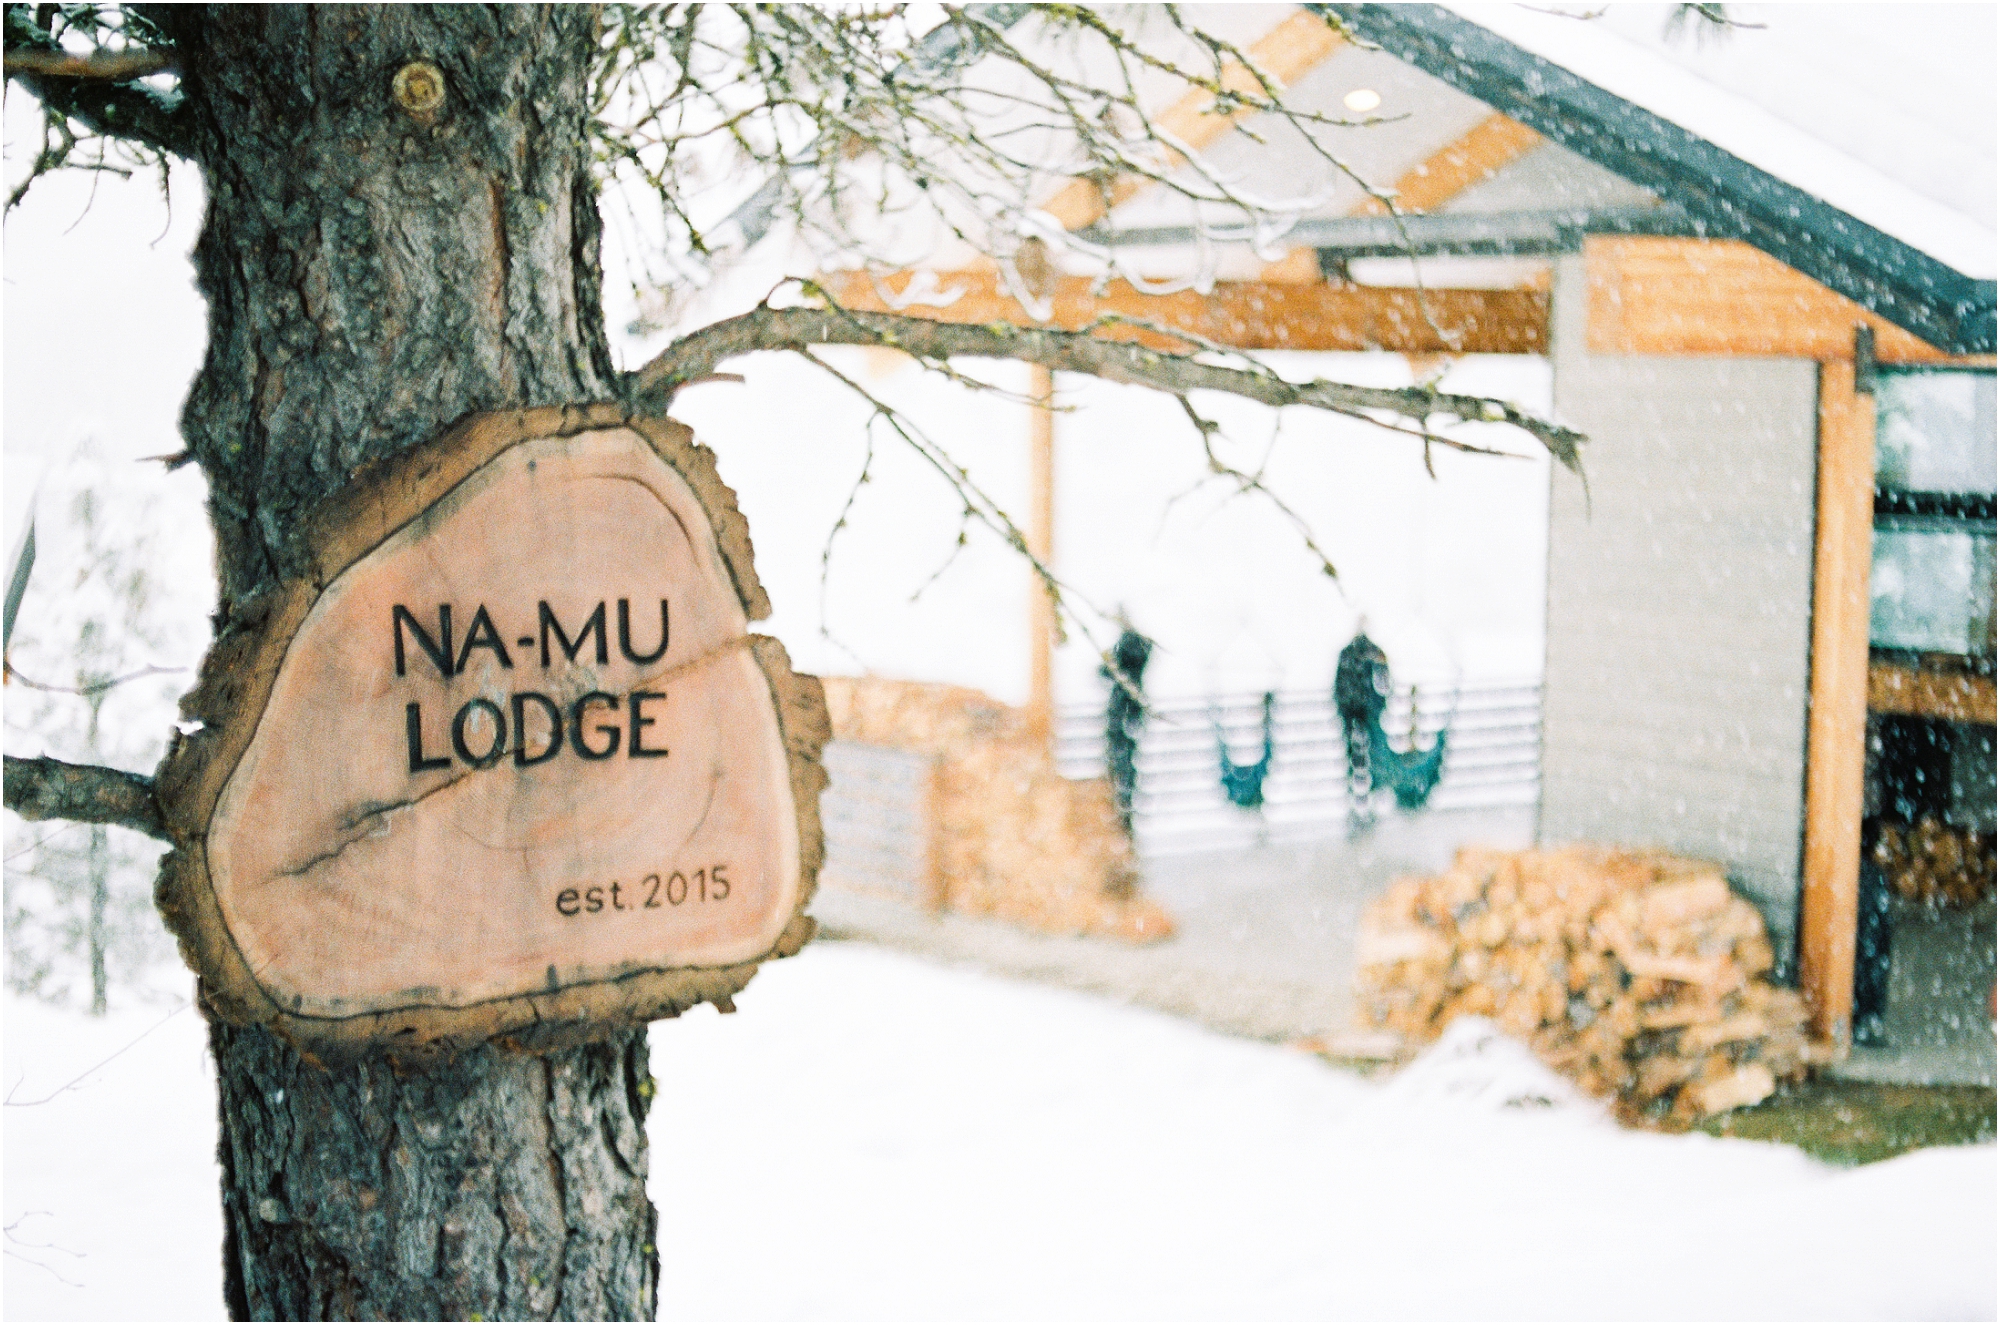 A film image of the Namu Lodge by Erica Swantek Photography at a snowy wedding workshop, the Cascade Workshop in Leavenworth, WA.